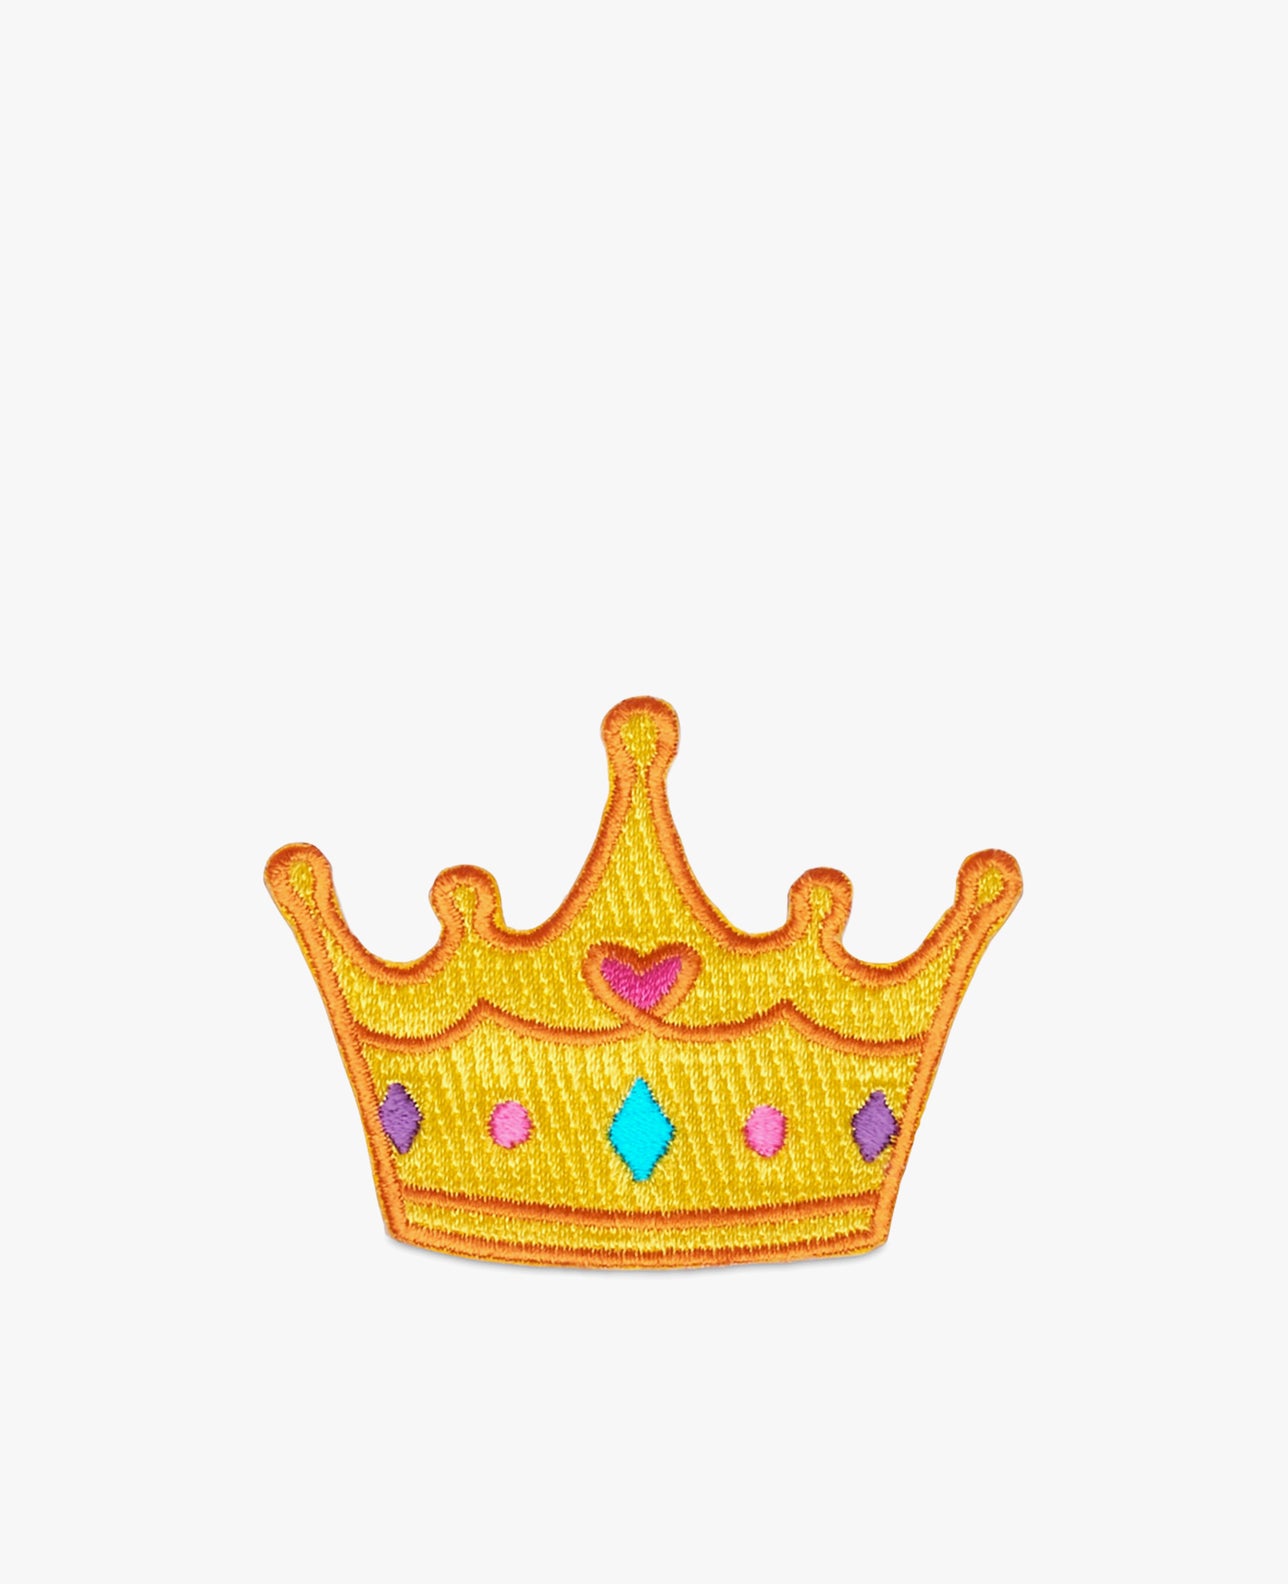 Patch: Crown